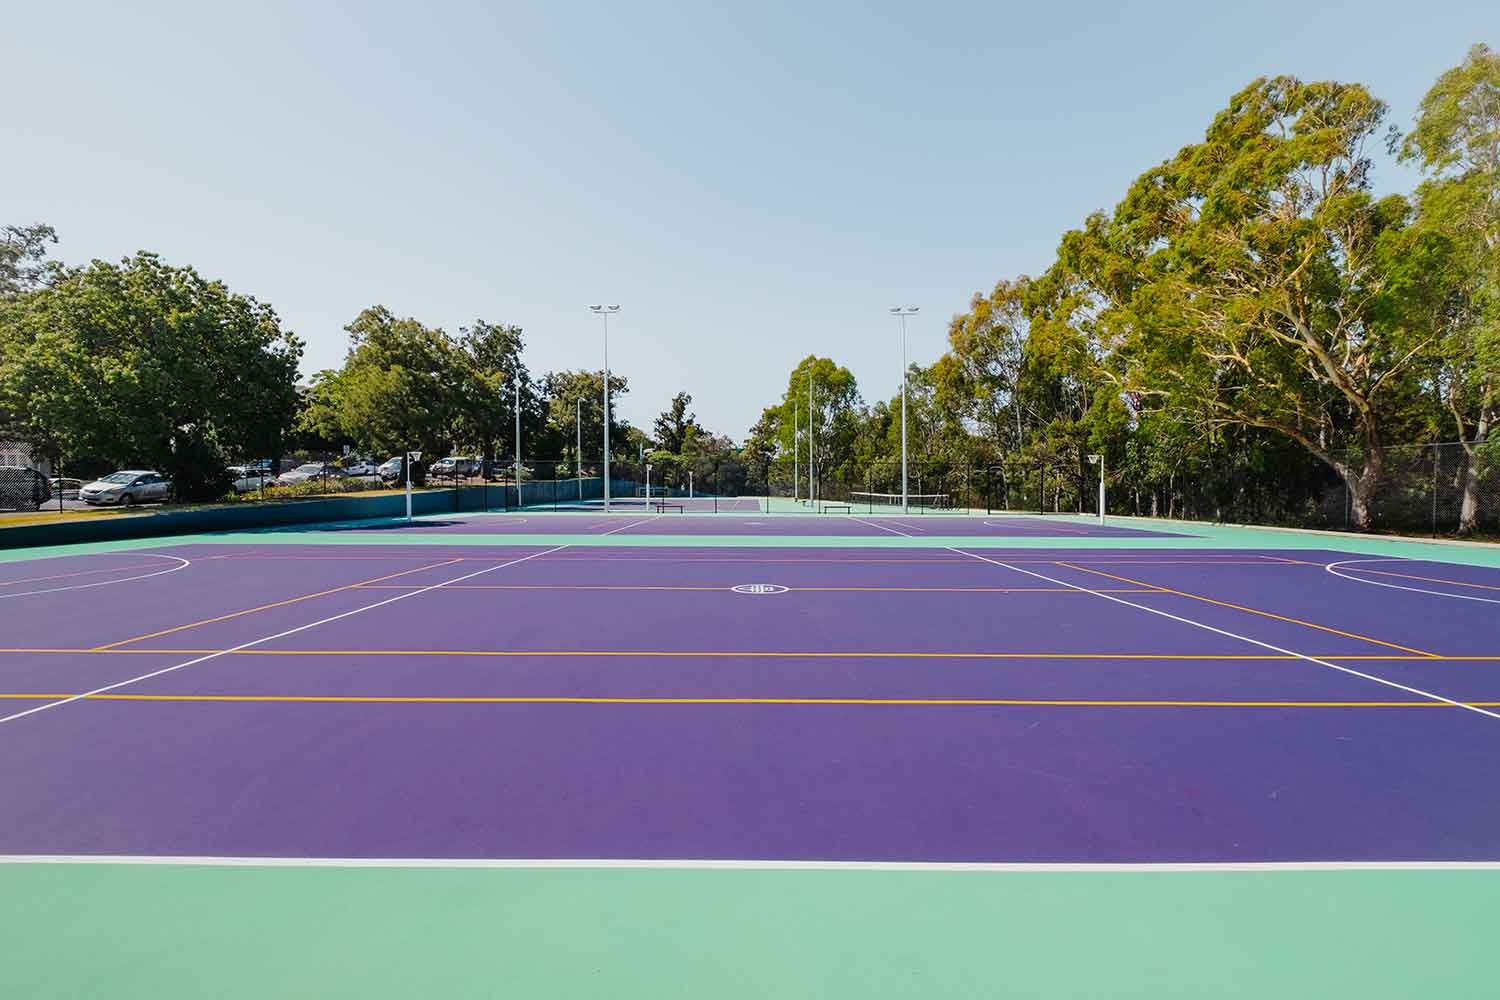 Outdoor green and purple acrylic surface sports fields with yellow and white lin markings, surrounded by trees